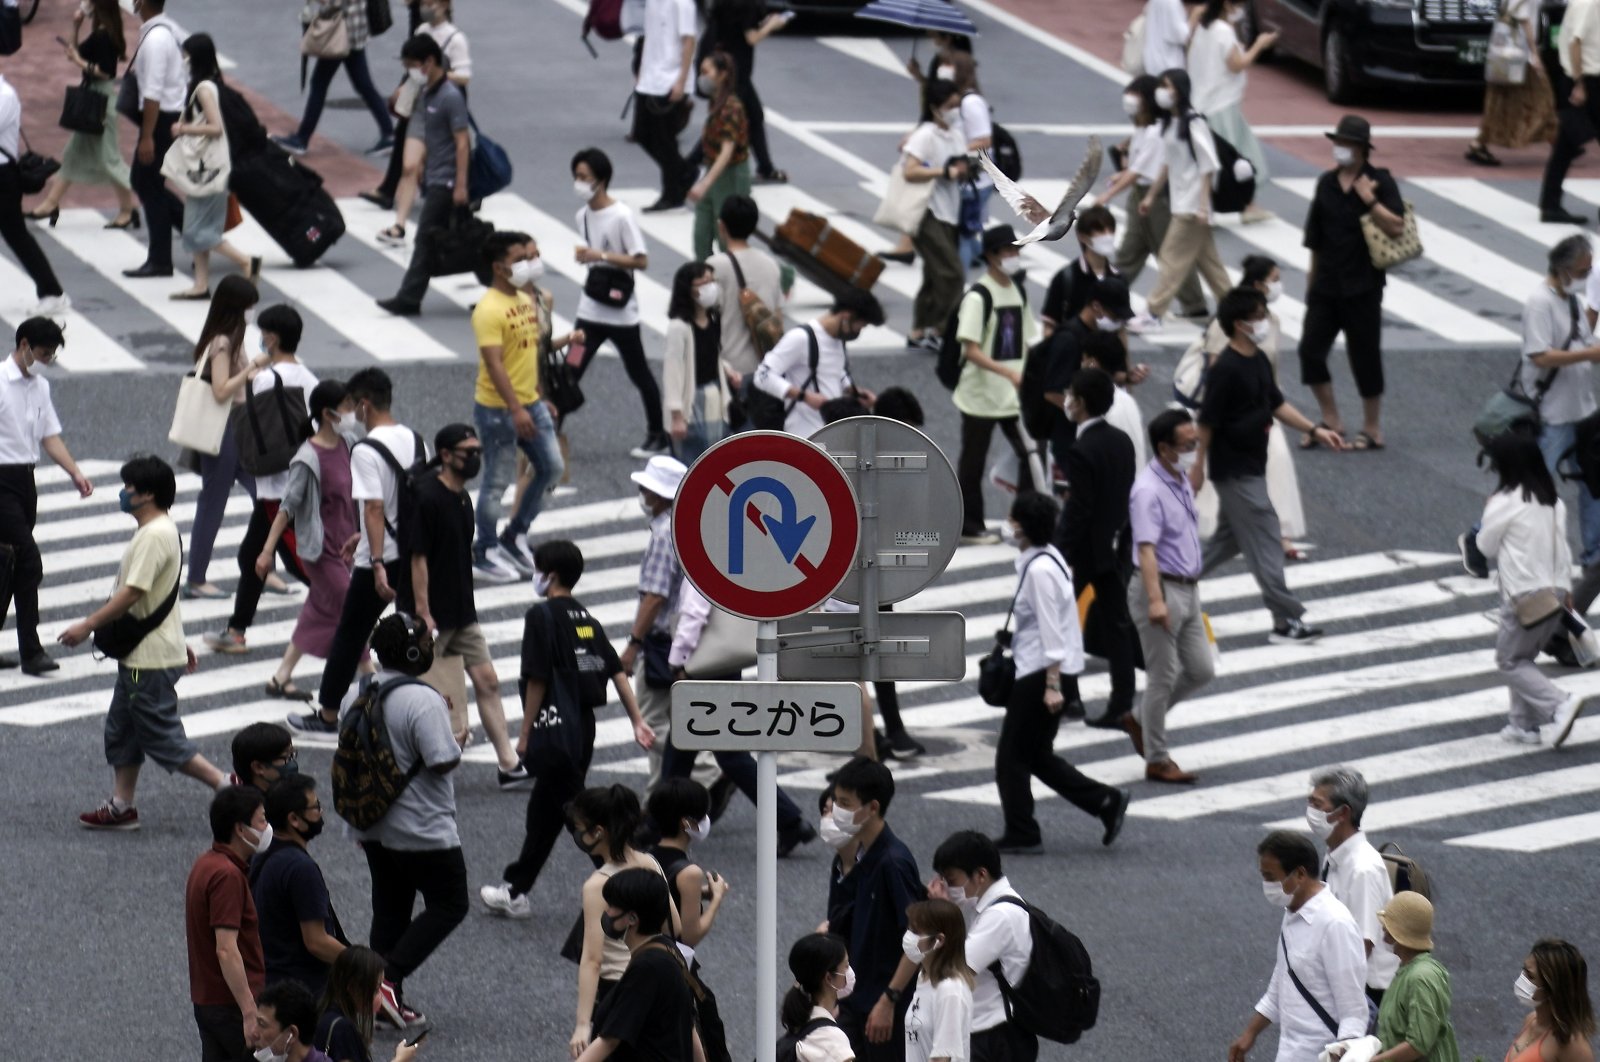 Near a No U Turn roads sign, people wearing masks against the spread of the new coronavirus walk at Shibuya pedestrian crossing in Tokyo Tuesday, July 21, 2020. (AP Photo)